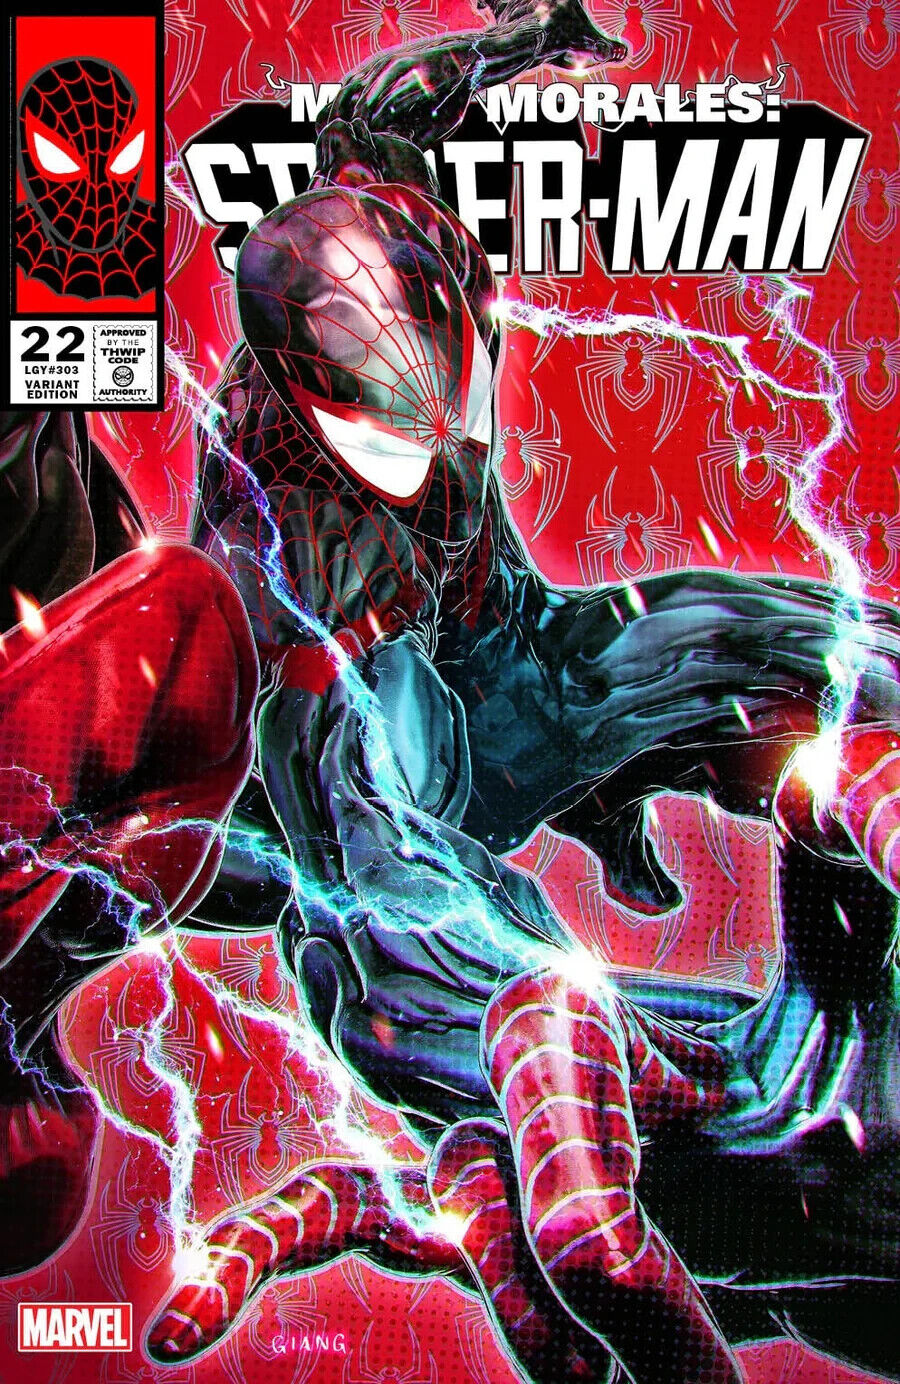 MILES MORALES: SPIDER-MAN #22 JOHN GIANG EXCLUSIVE TRADE DRESS - RELEASE 7/3